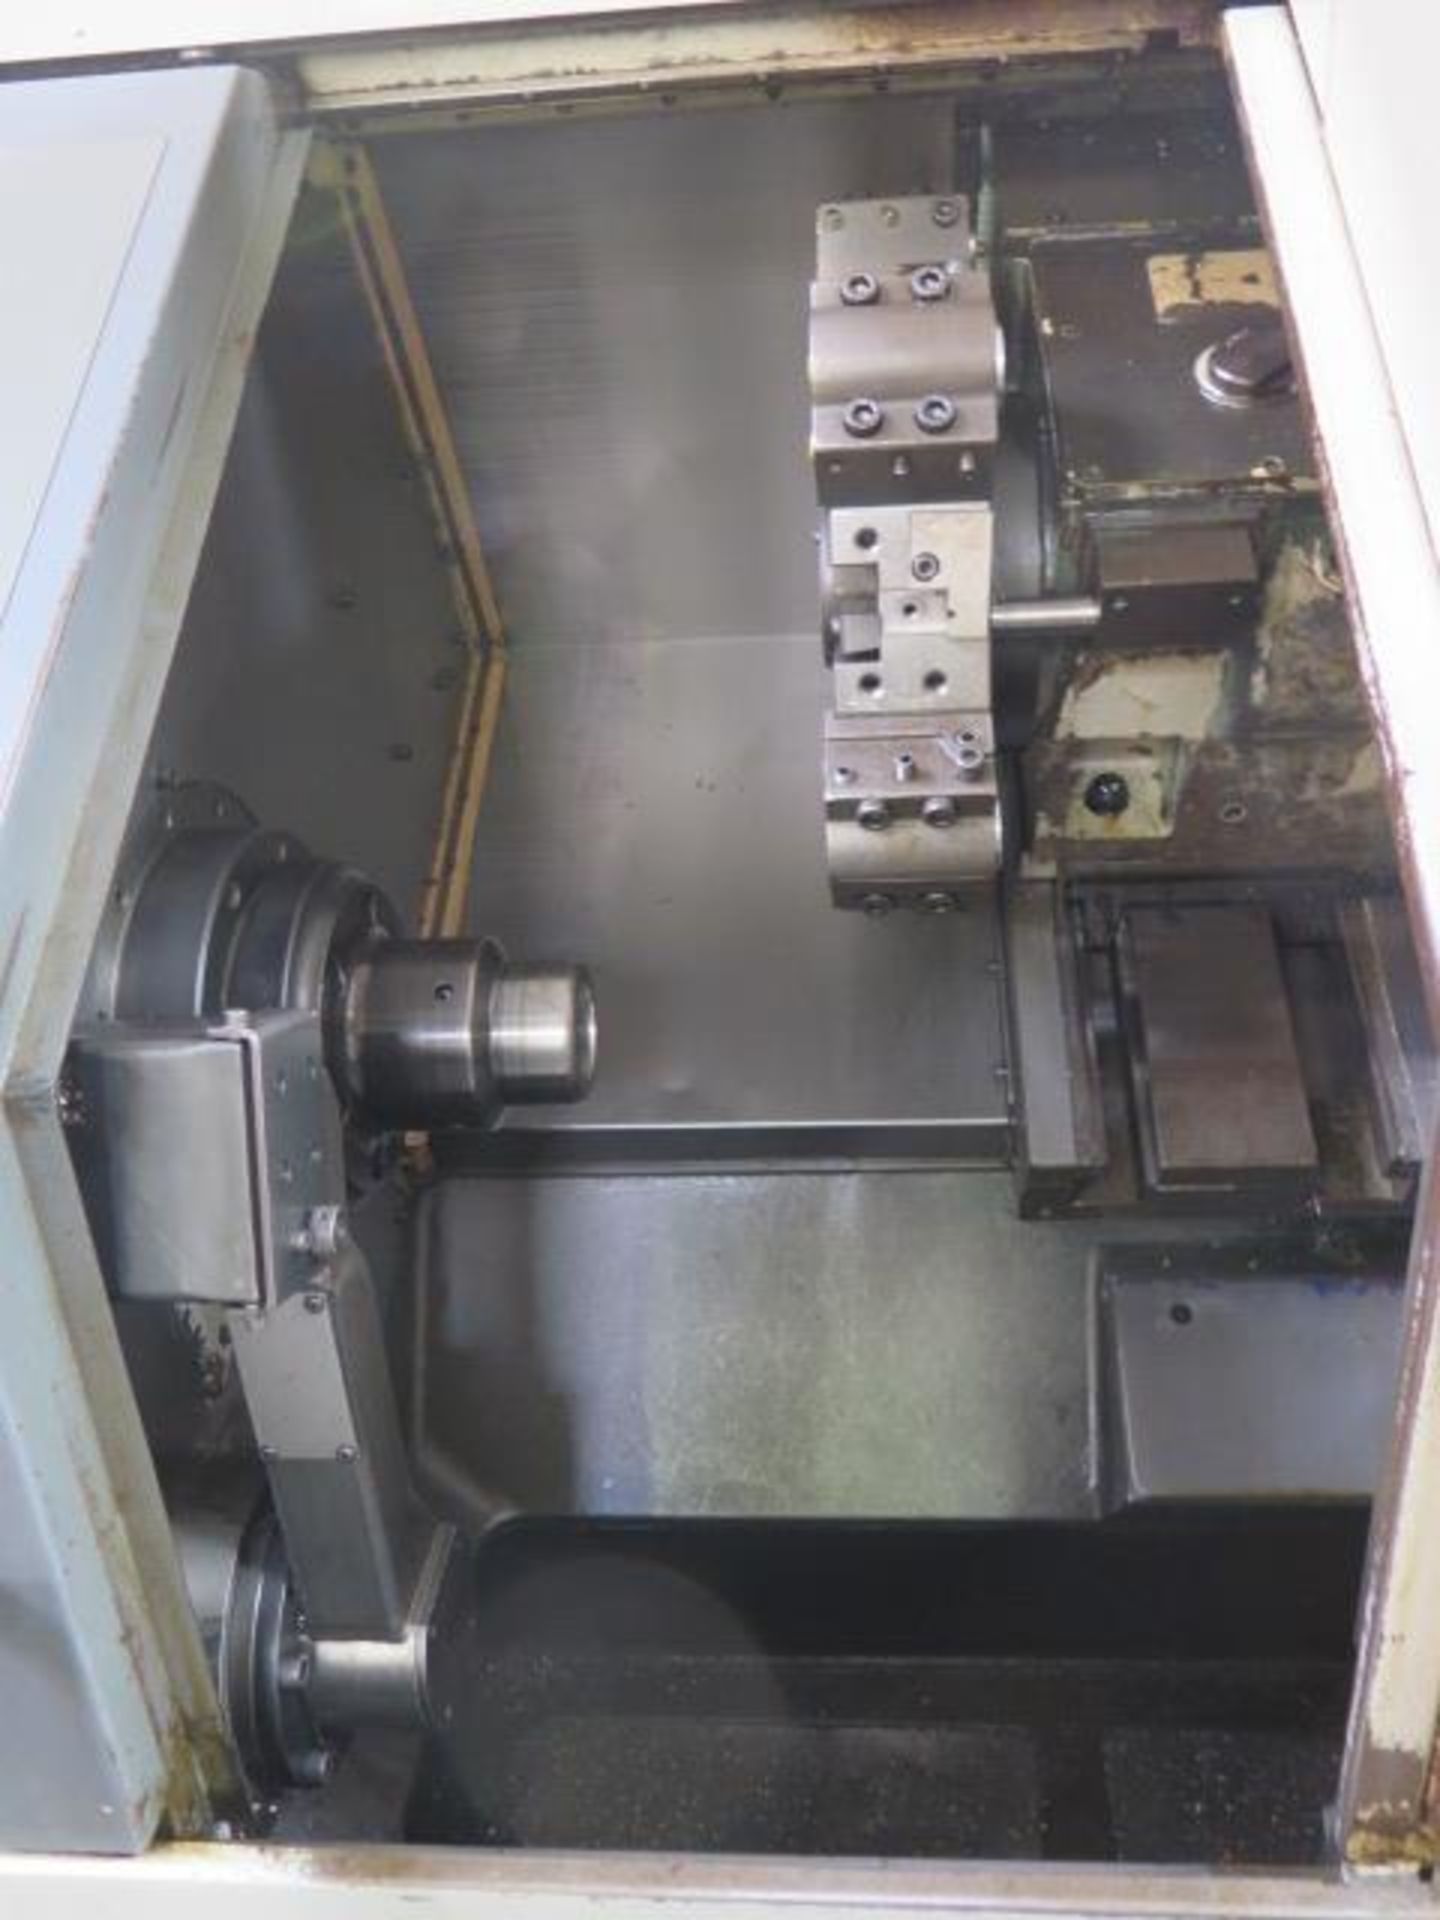 Mori Seiki CL-20A CNC Lathe s/n 544 w/ Yasnac Controls, Tool Presetter, 10-Station, SOLD AS IS - Image 4 of 10